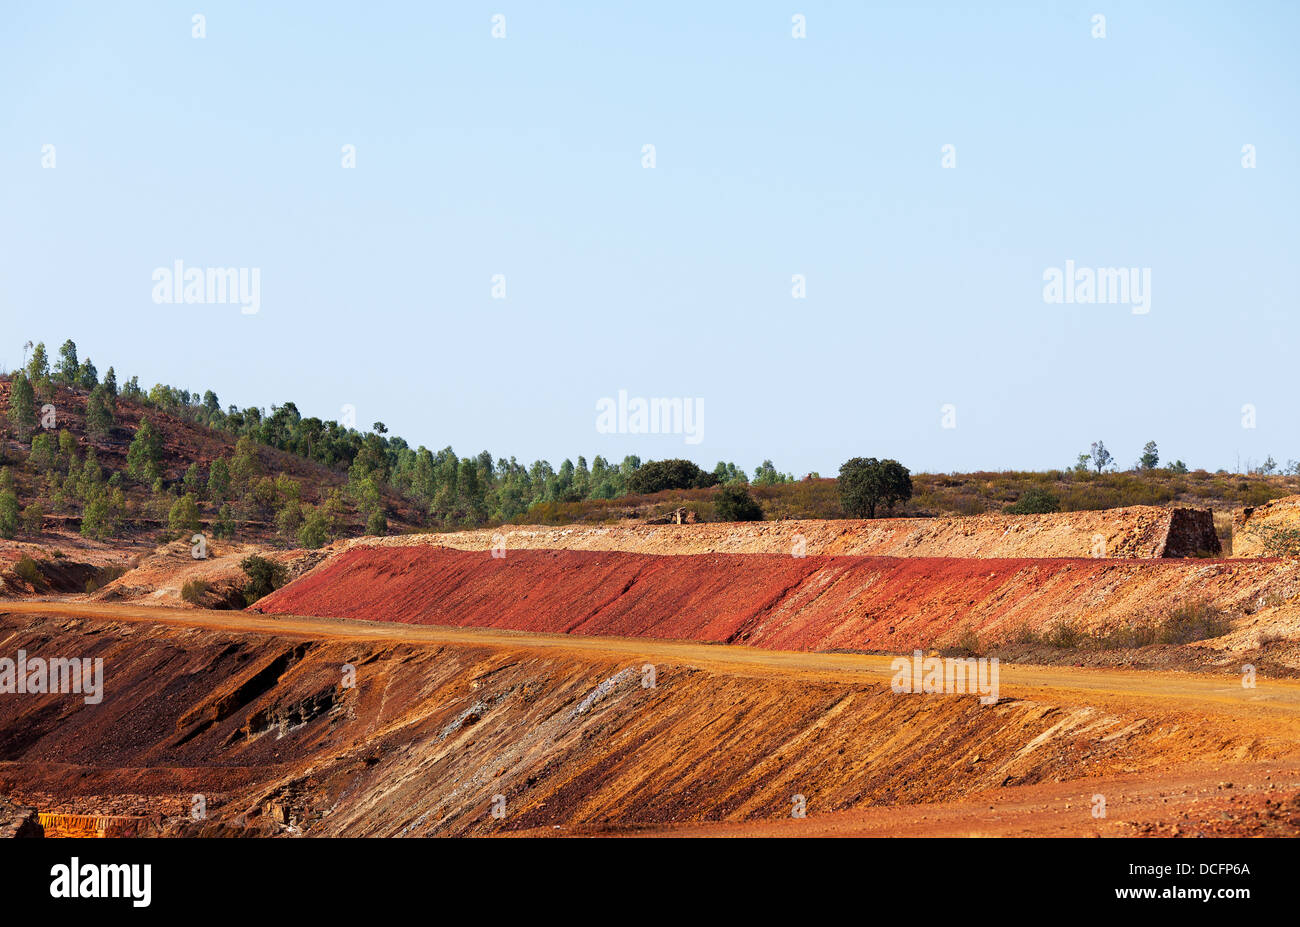 Copper mine tailings or refuse heaps remaining at a mine after the ore has been processed Stock Photo